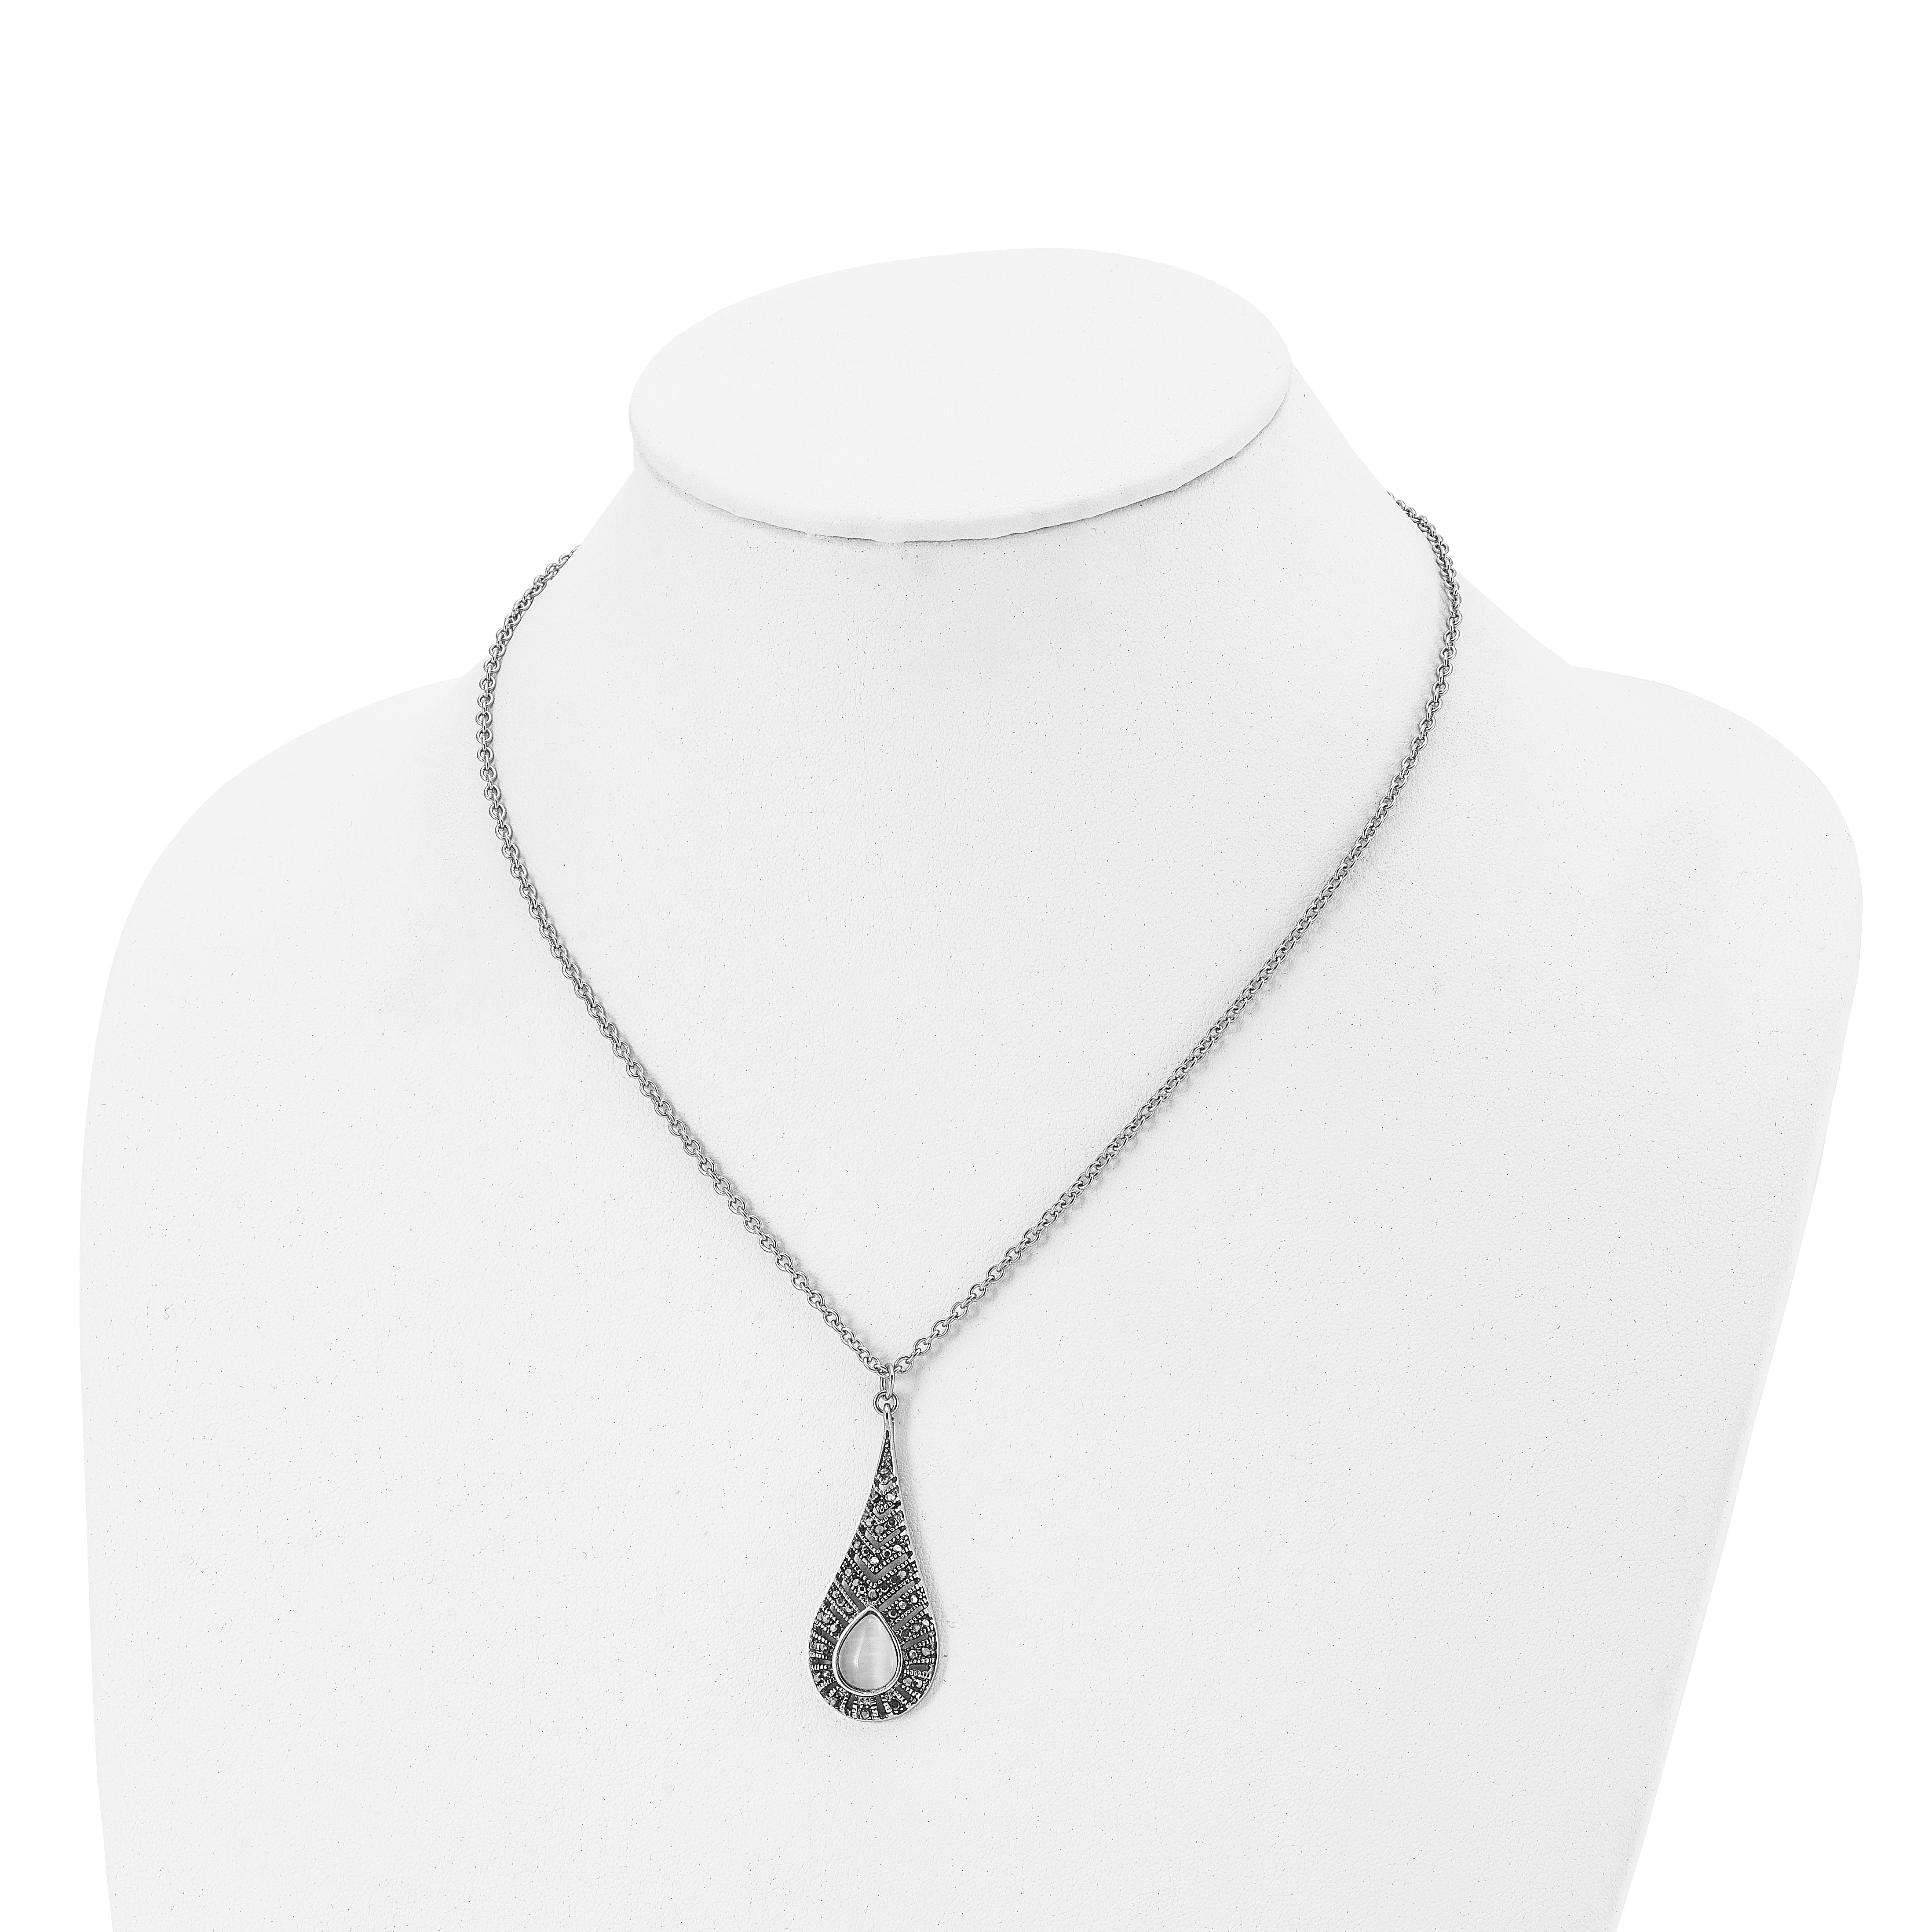 Stainless Steel Polished w/Marcasite and Cat's Eye 18in Necklace